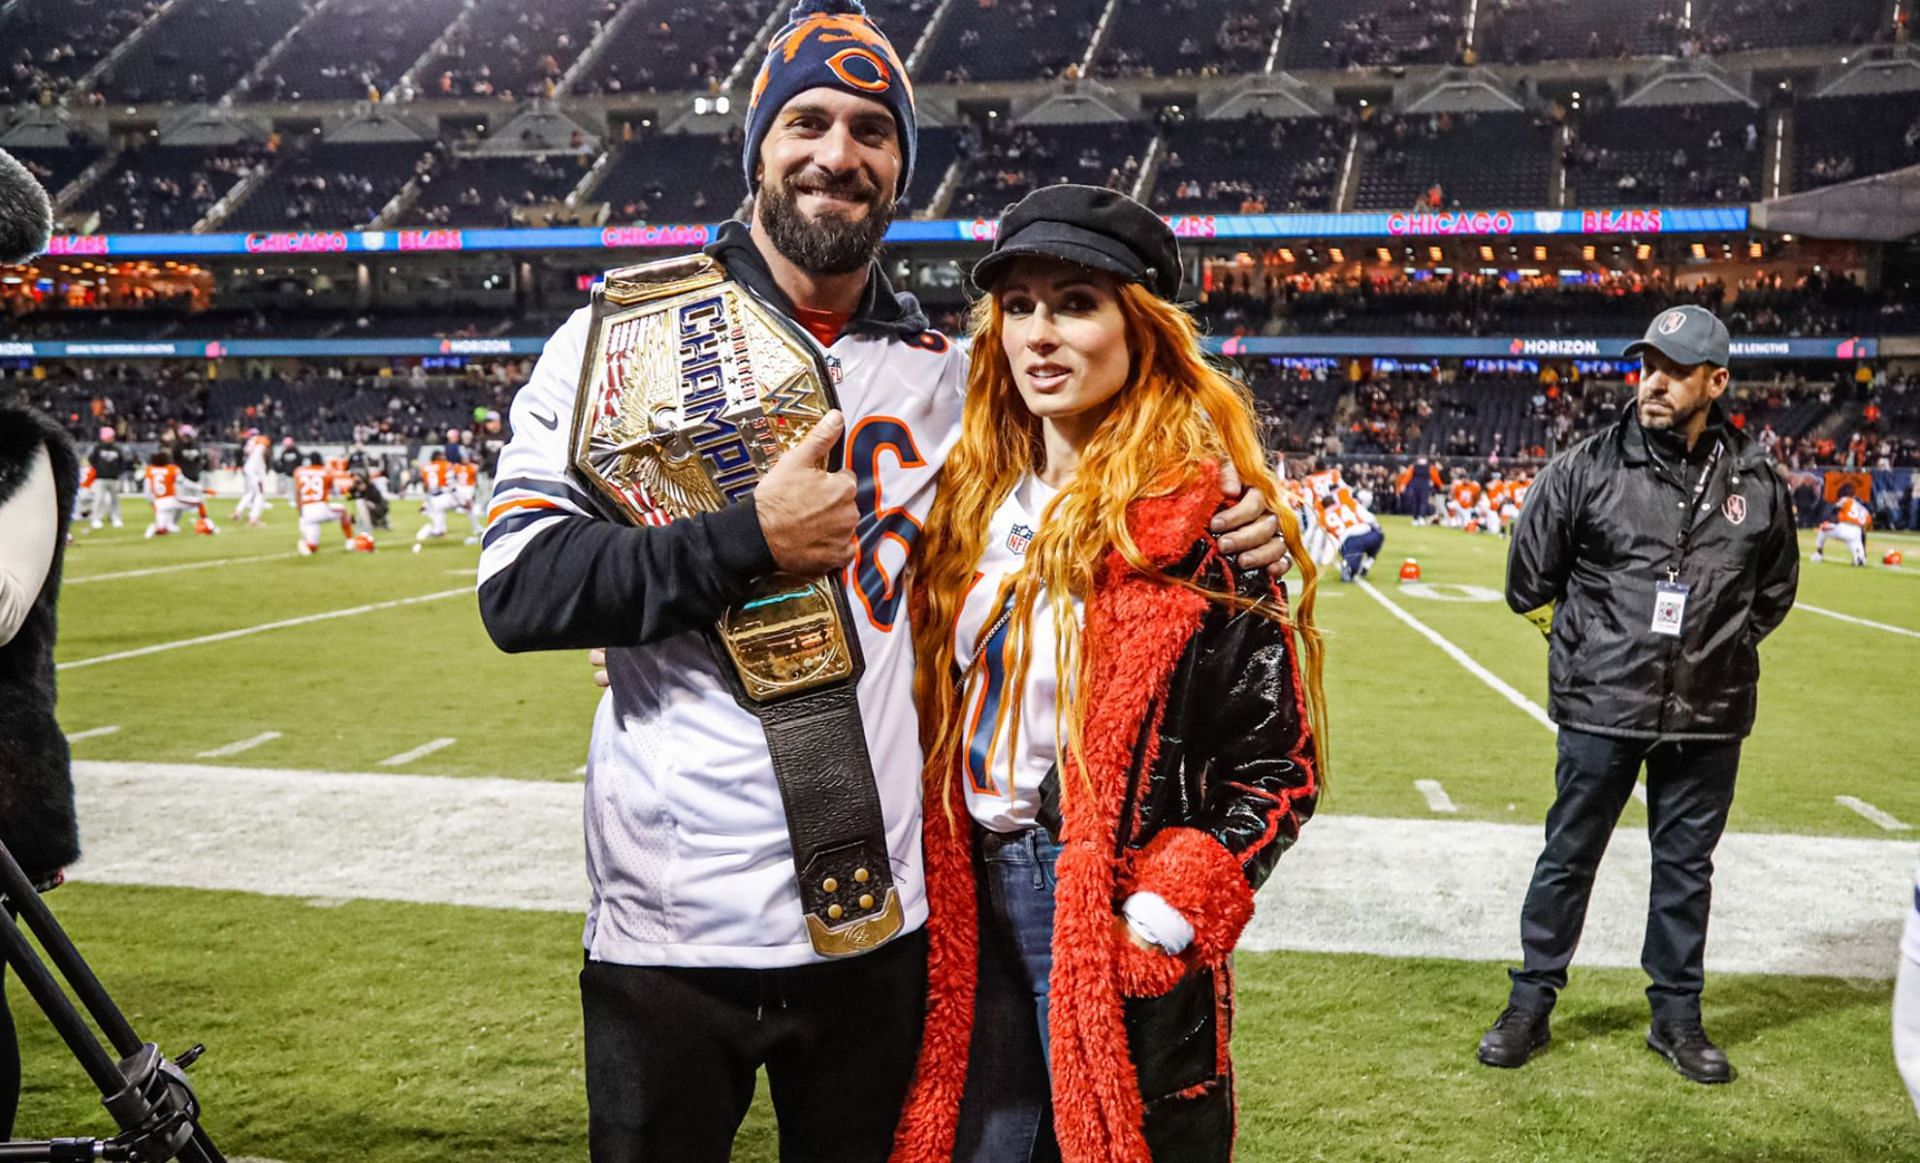 WWE stars Seth Rollins and Becky Lynch attend Chicago Bears game